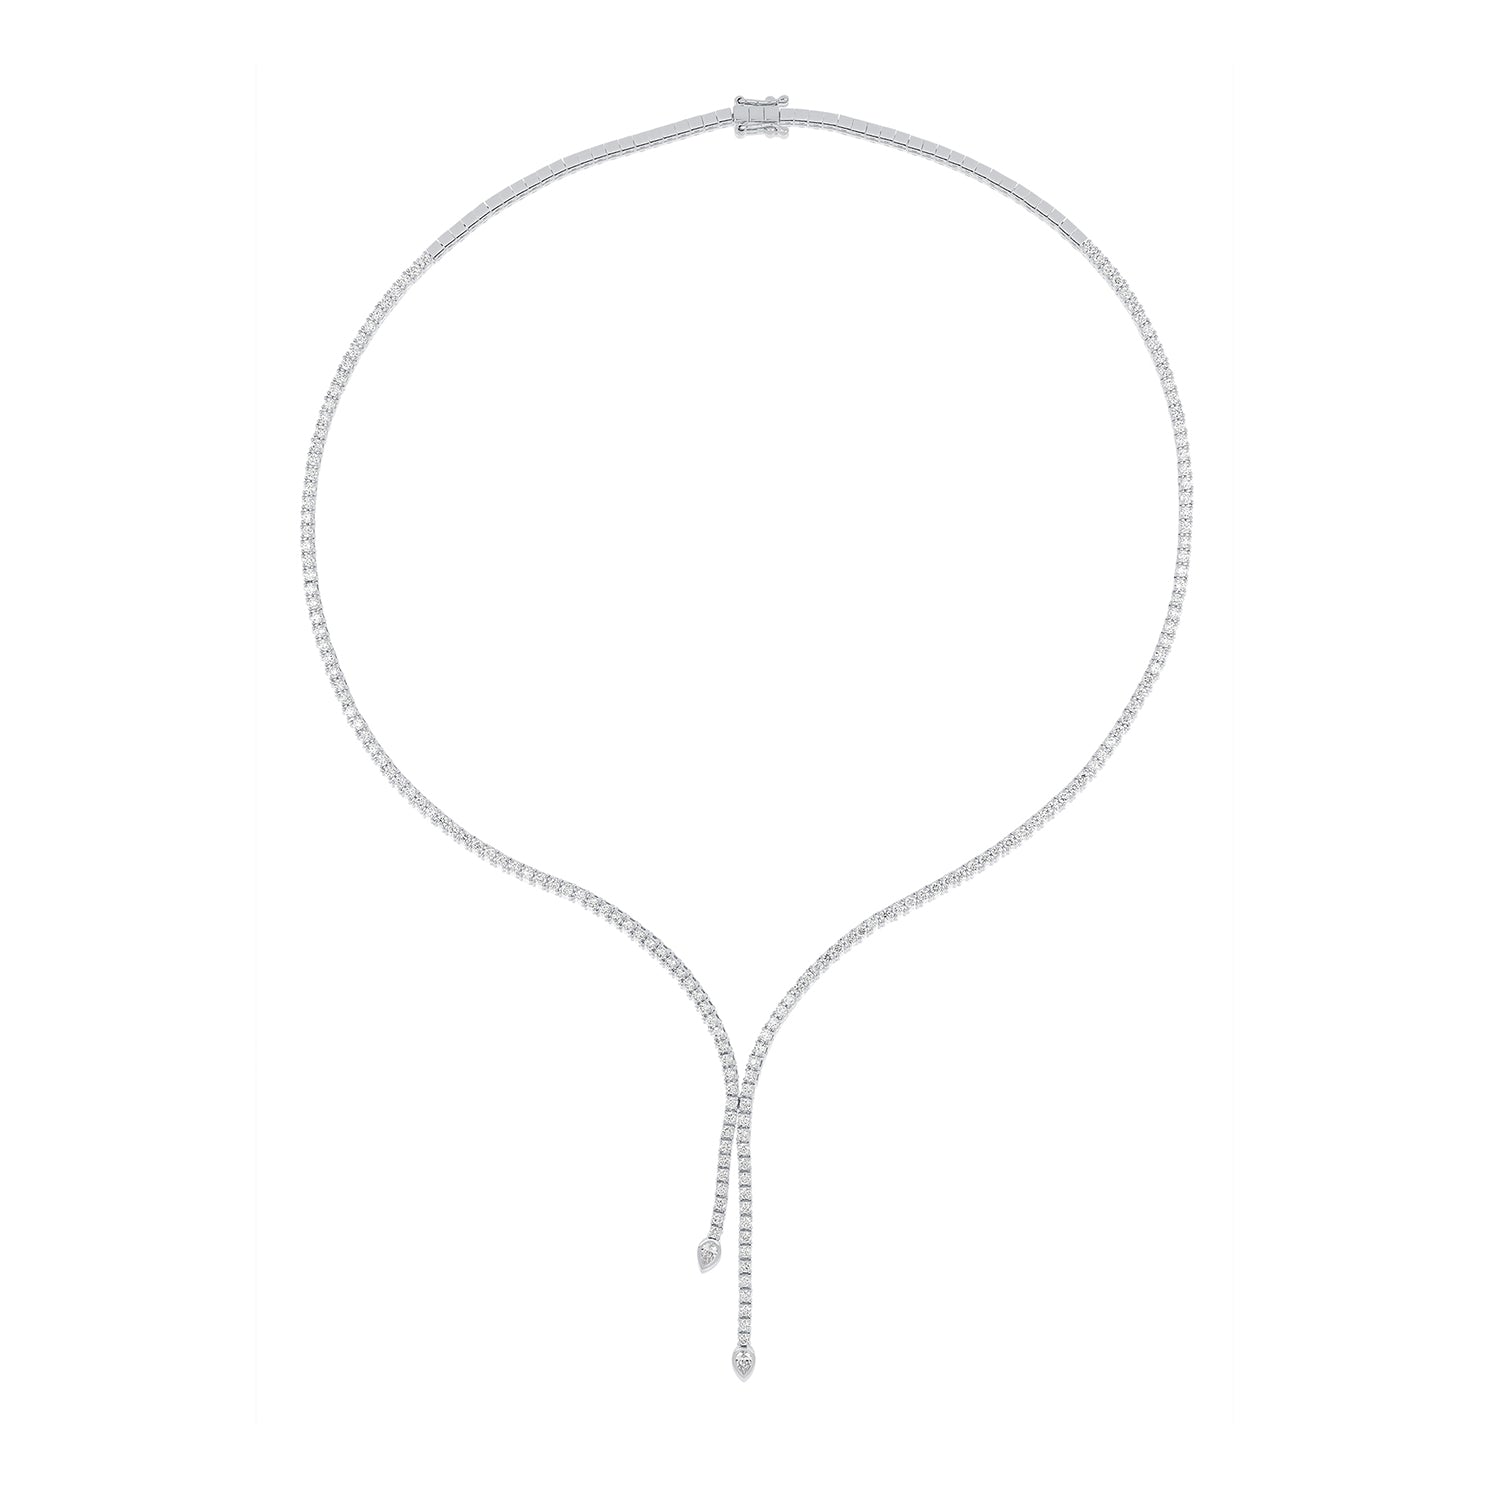 Diamond Lily Necklace in 14k white gold